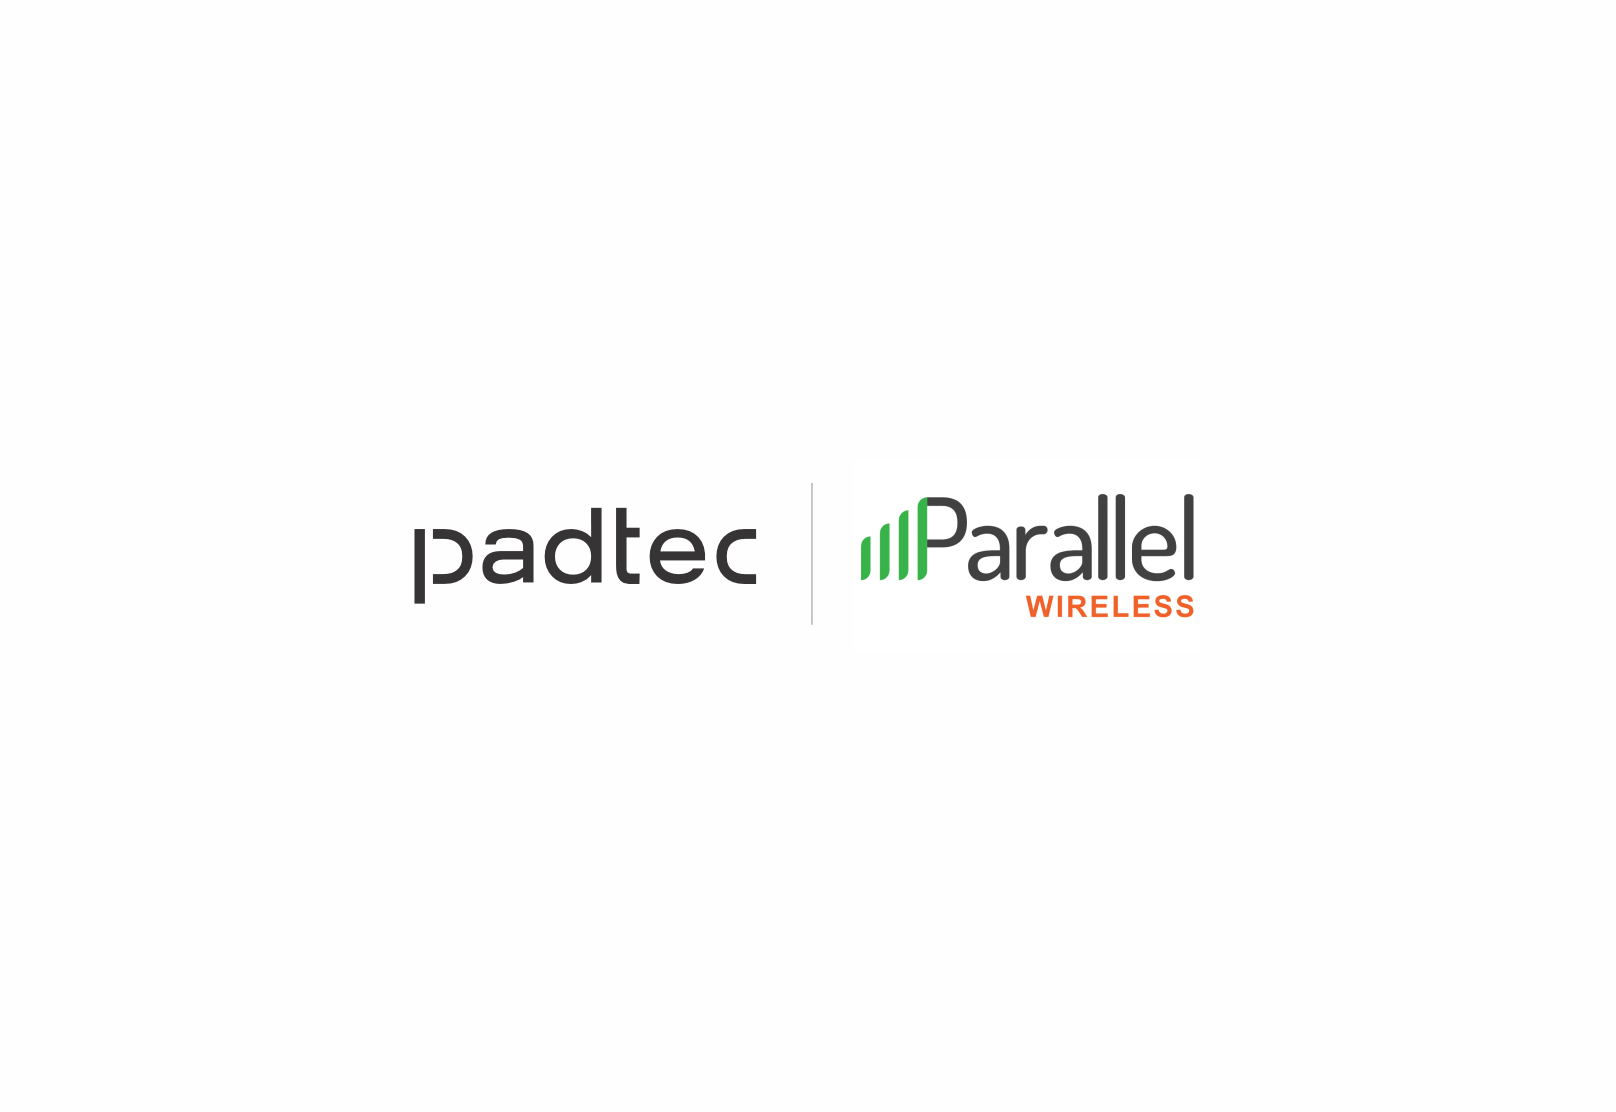 Parallel Wireless teams up with Padtec to introduce its innovative GreenRAN™ platform in Brazil and Latin America